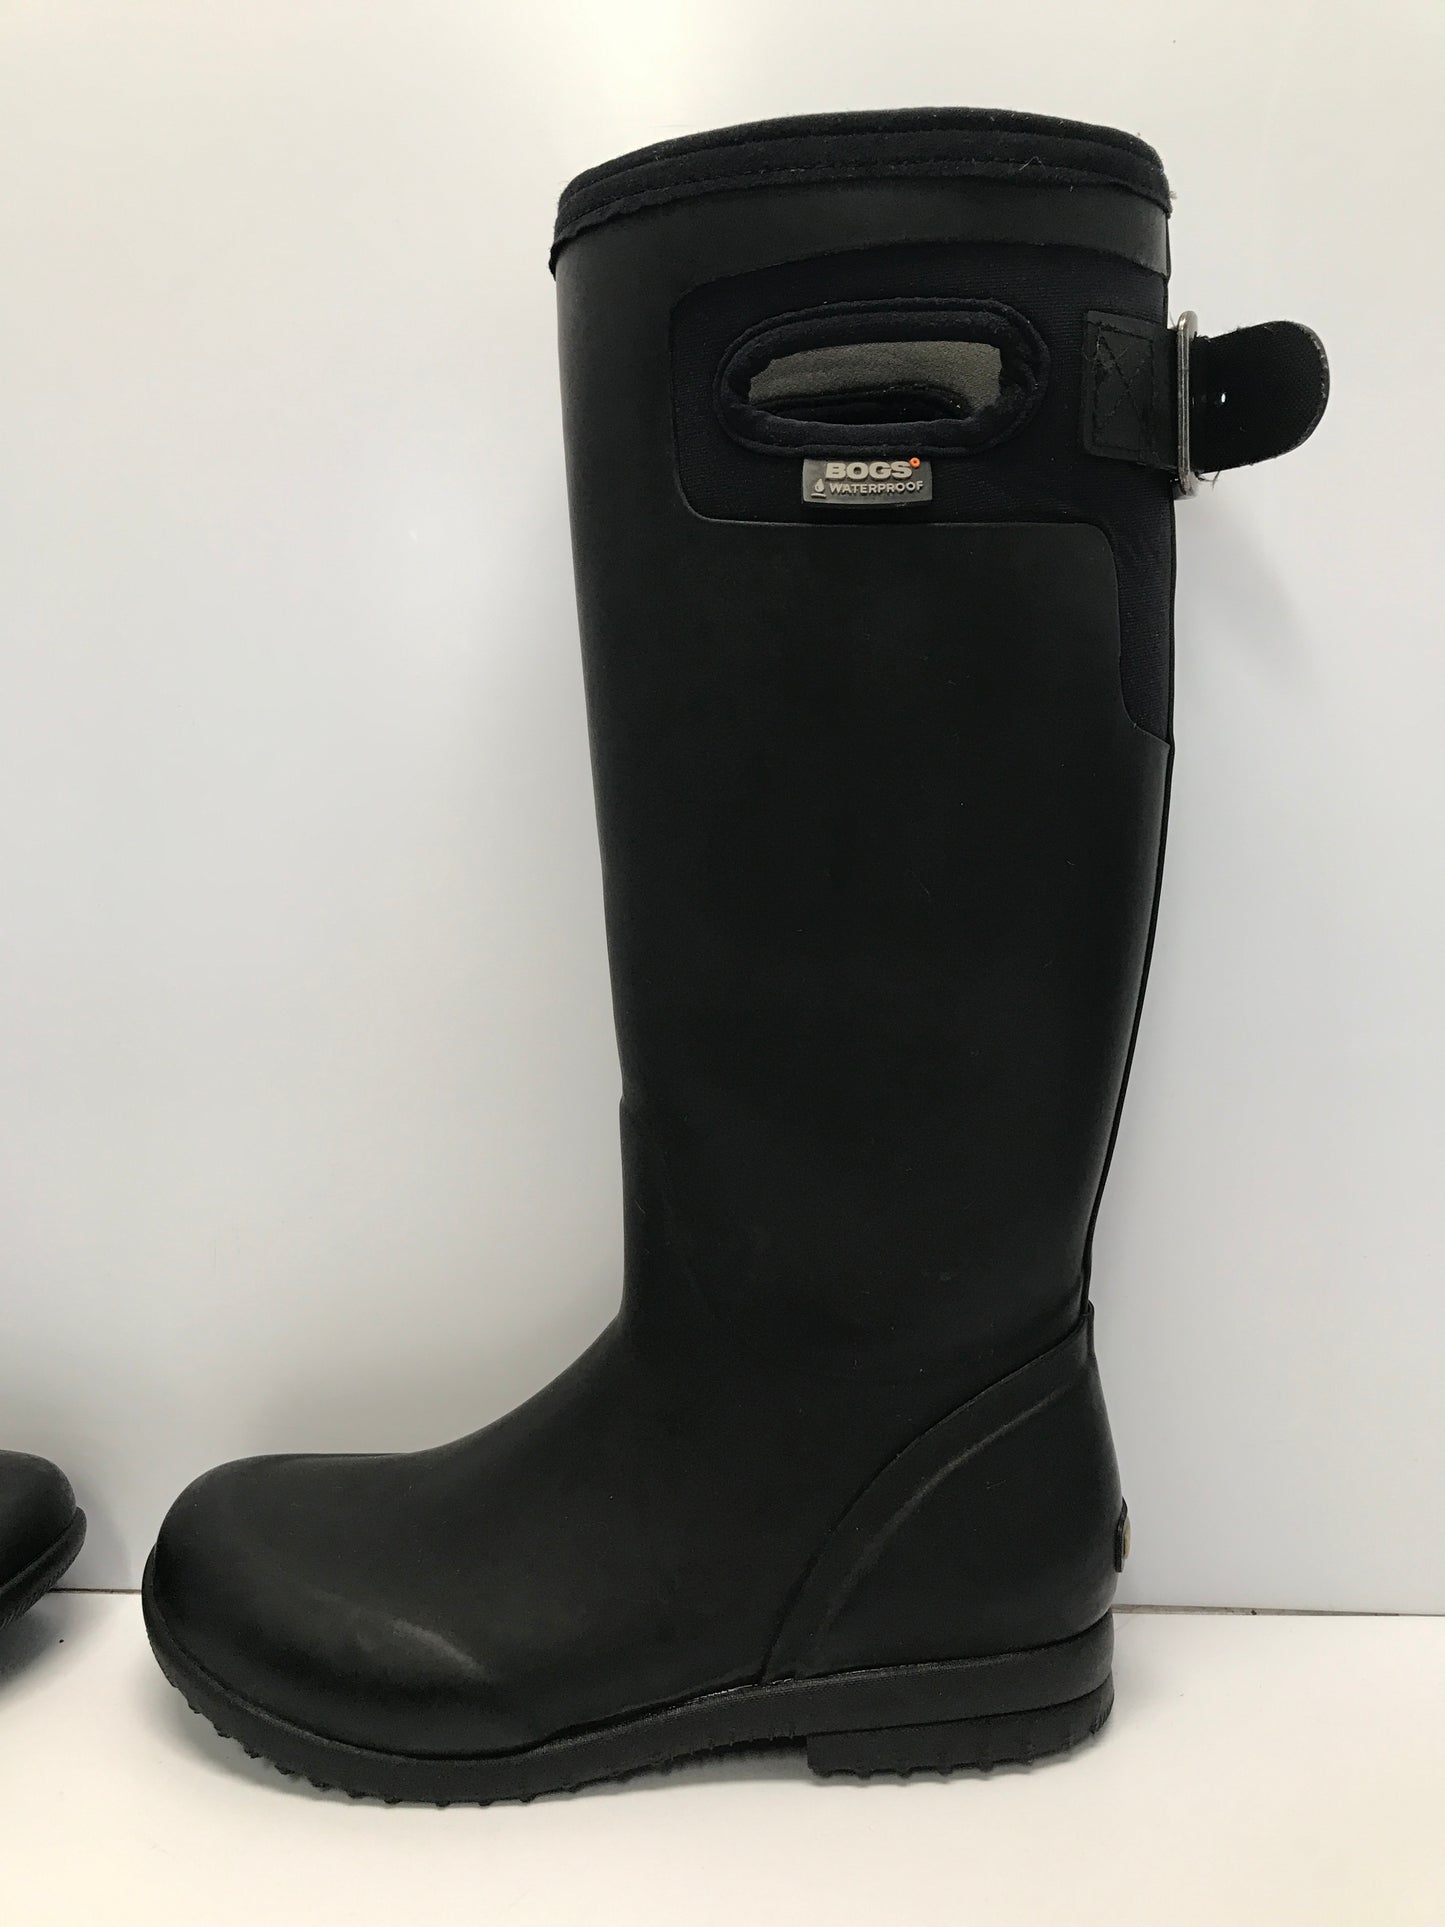 Winter Boots Ladies Size 5 Bogs Neoprene Black Outstanding Quality